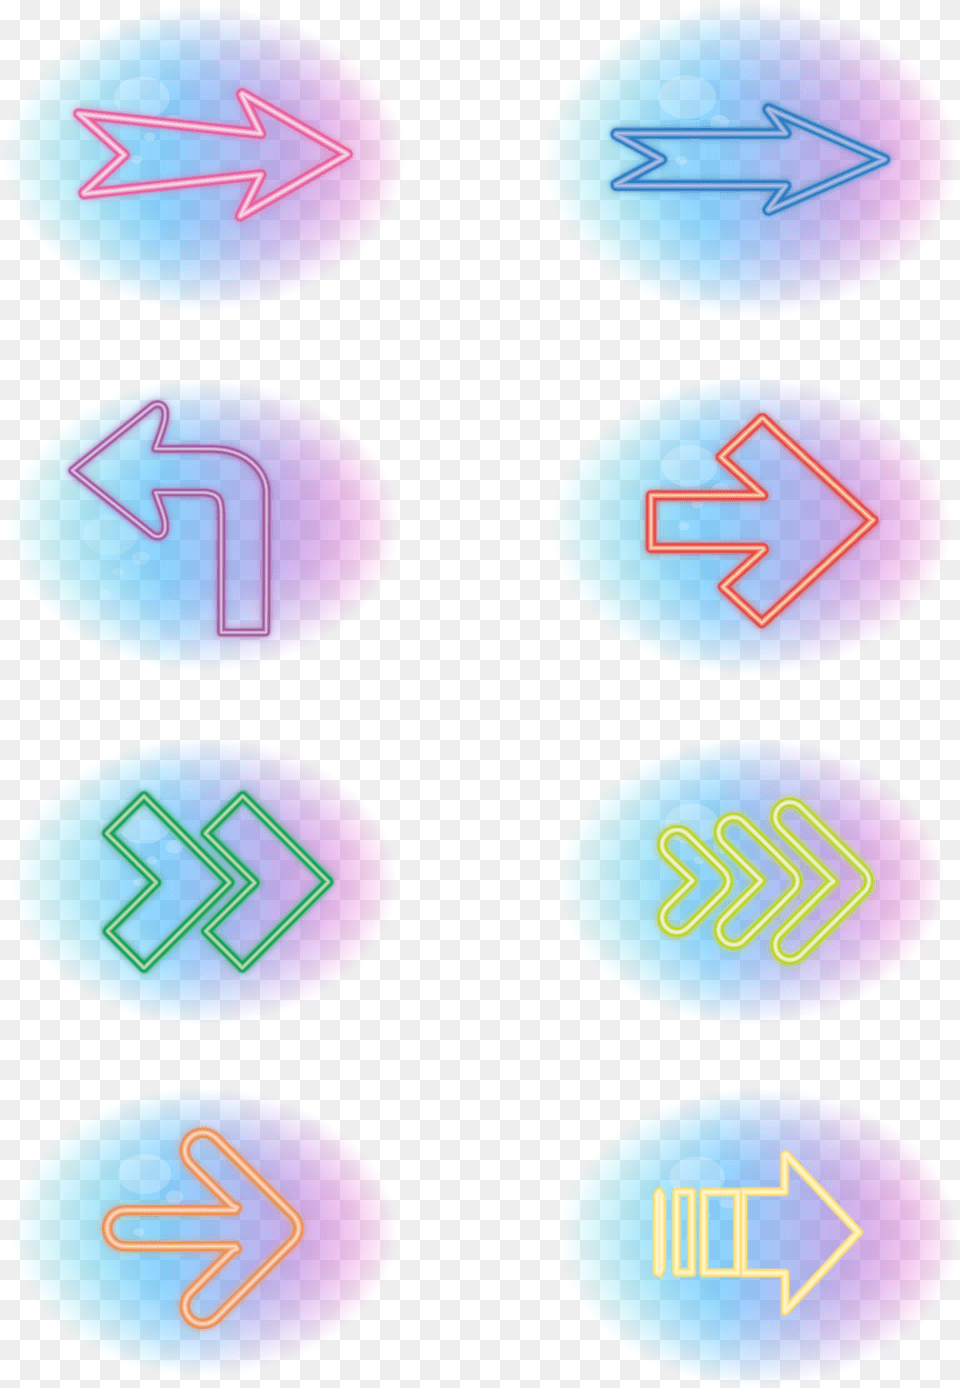 Neon Arrows Glowing Colorful Minimalistic And Vector Colorfulness, Light Free Png Download